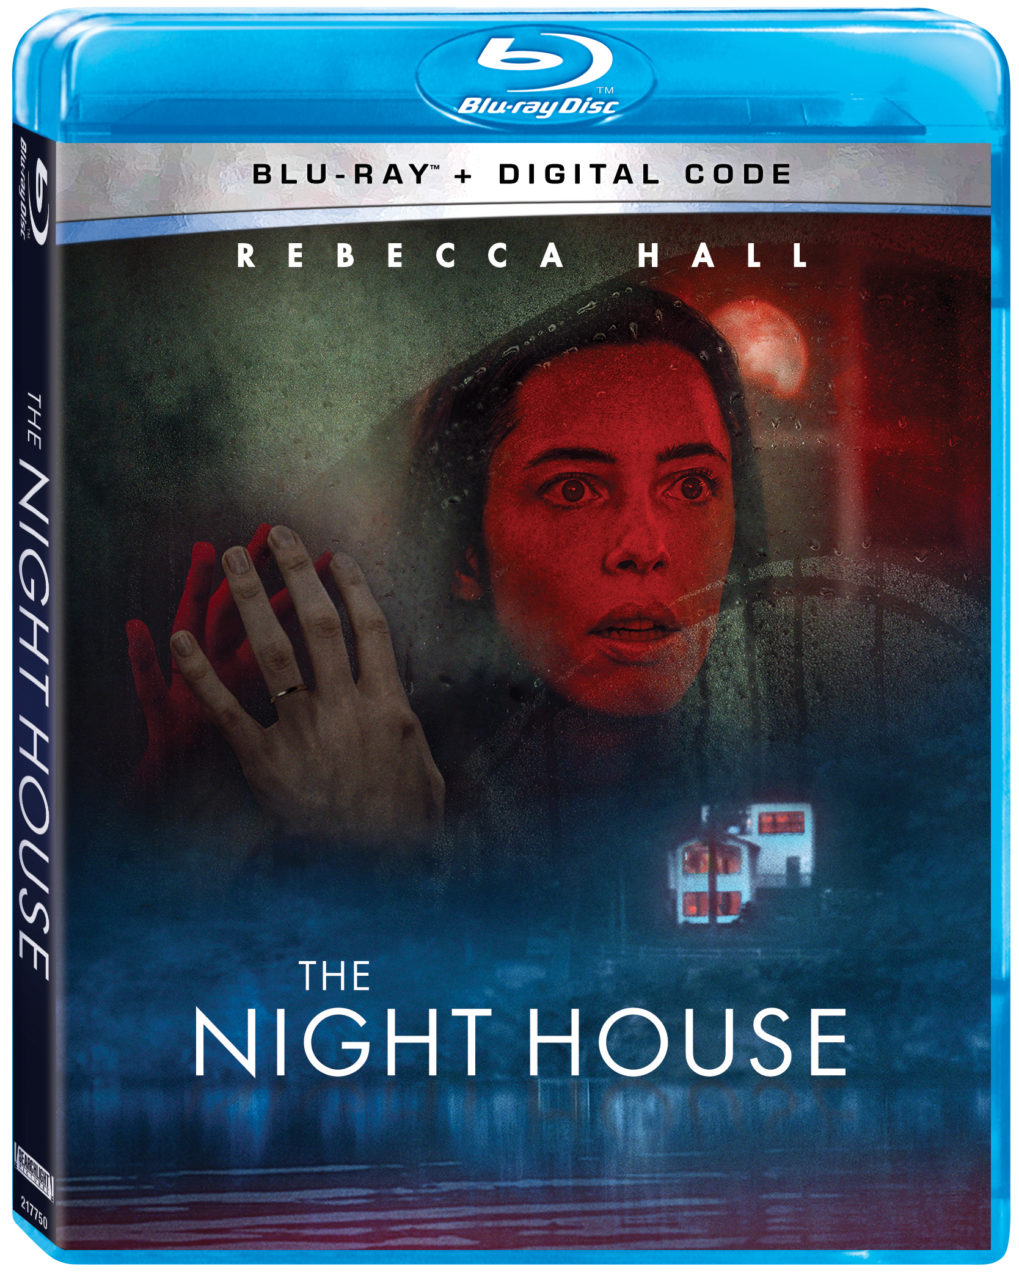 The Night House Blu-Ray Combo Pack cover (Searchlight Pictures/Disney Media & Entertainment Distribution)